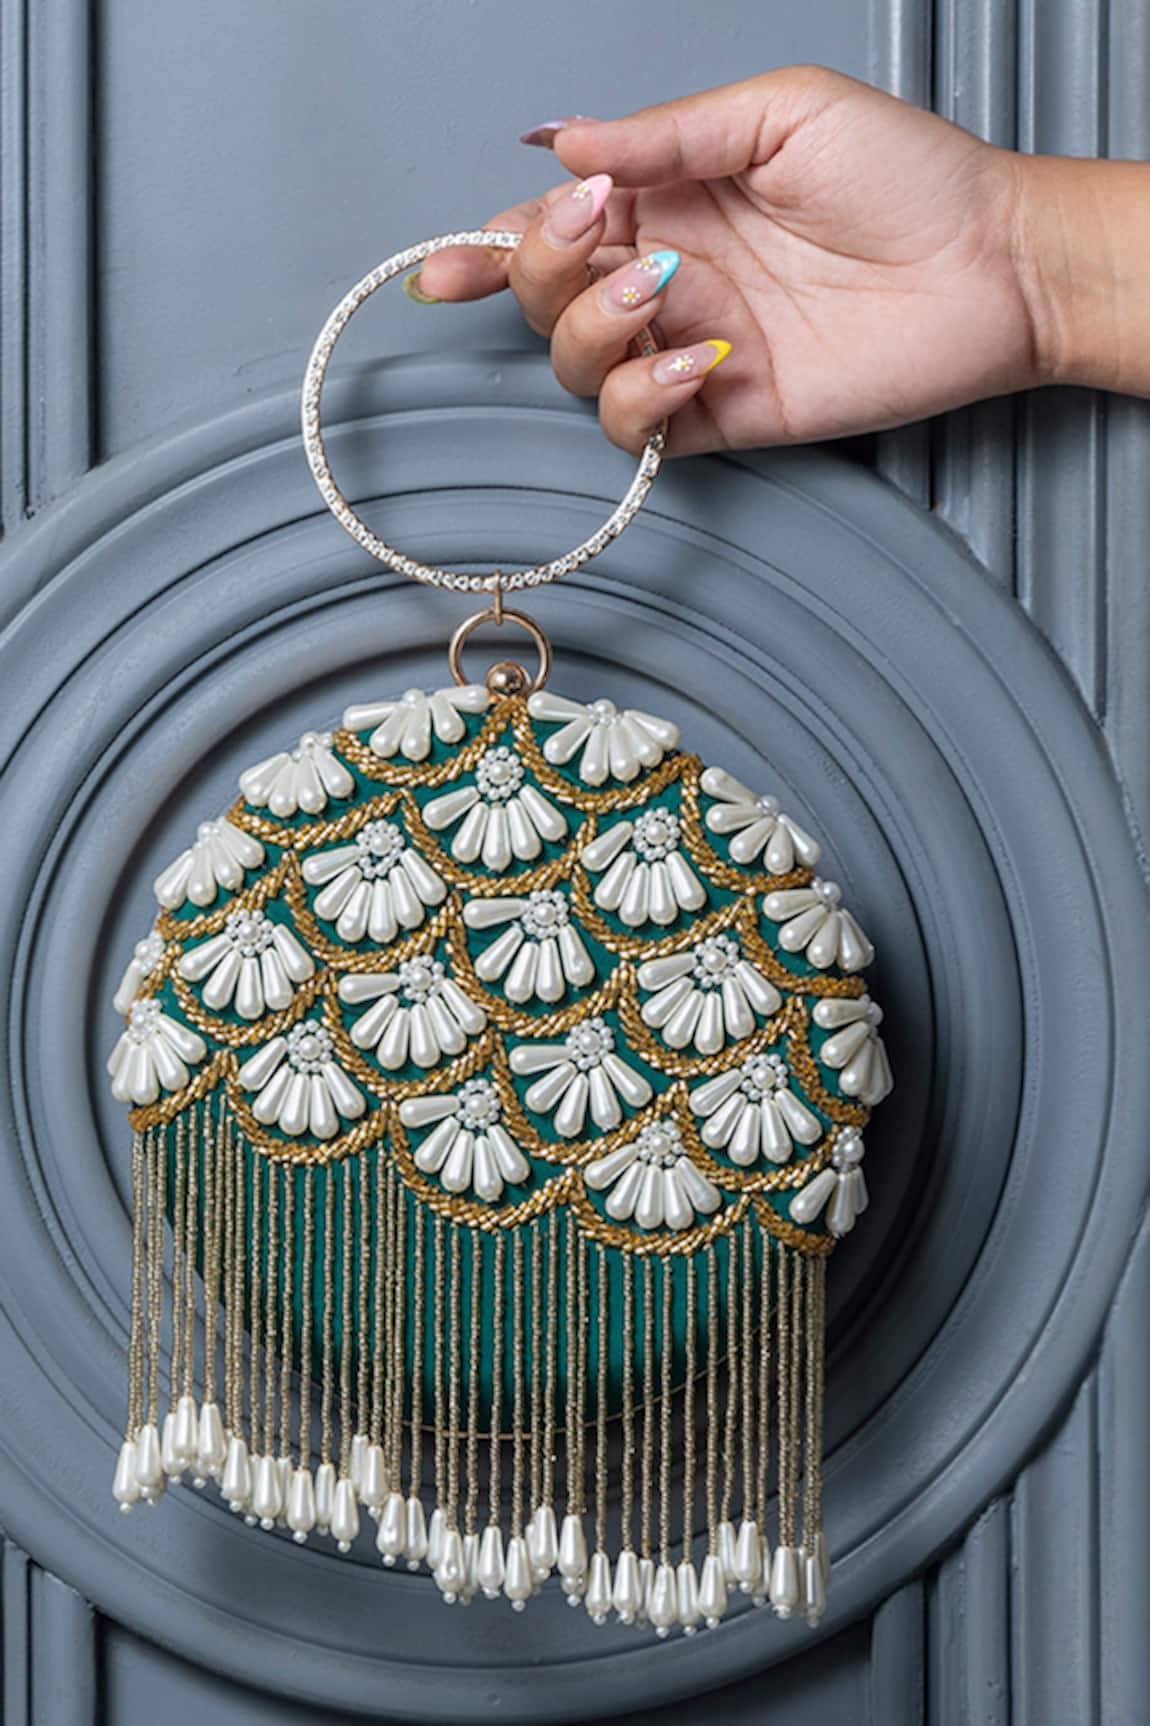 THE TAN CLAN Irsa Pearl Embroidered Clutch